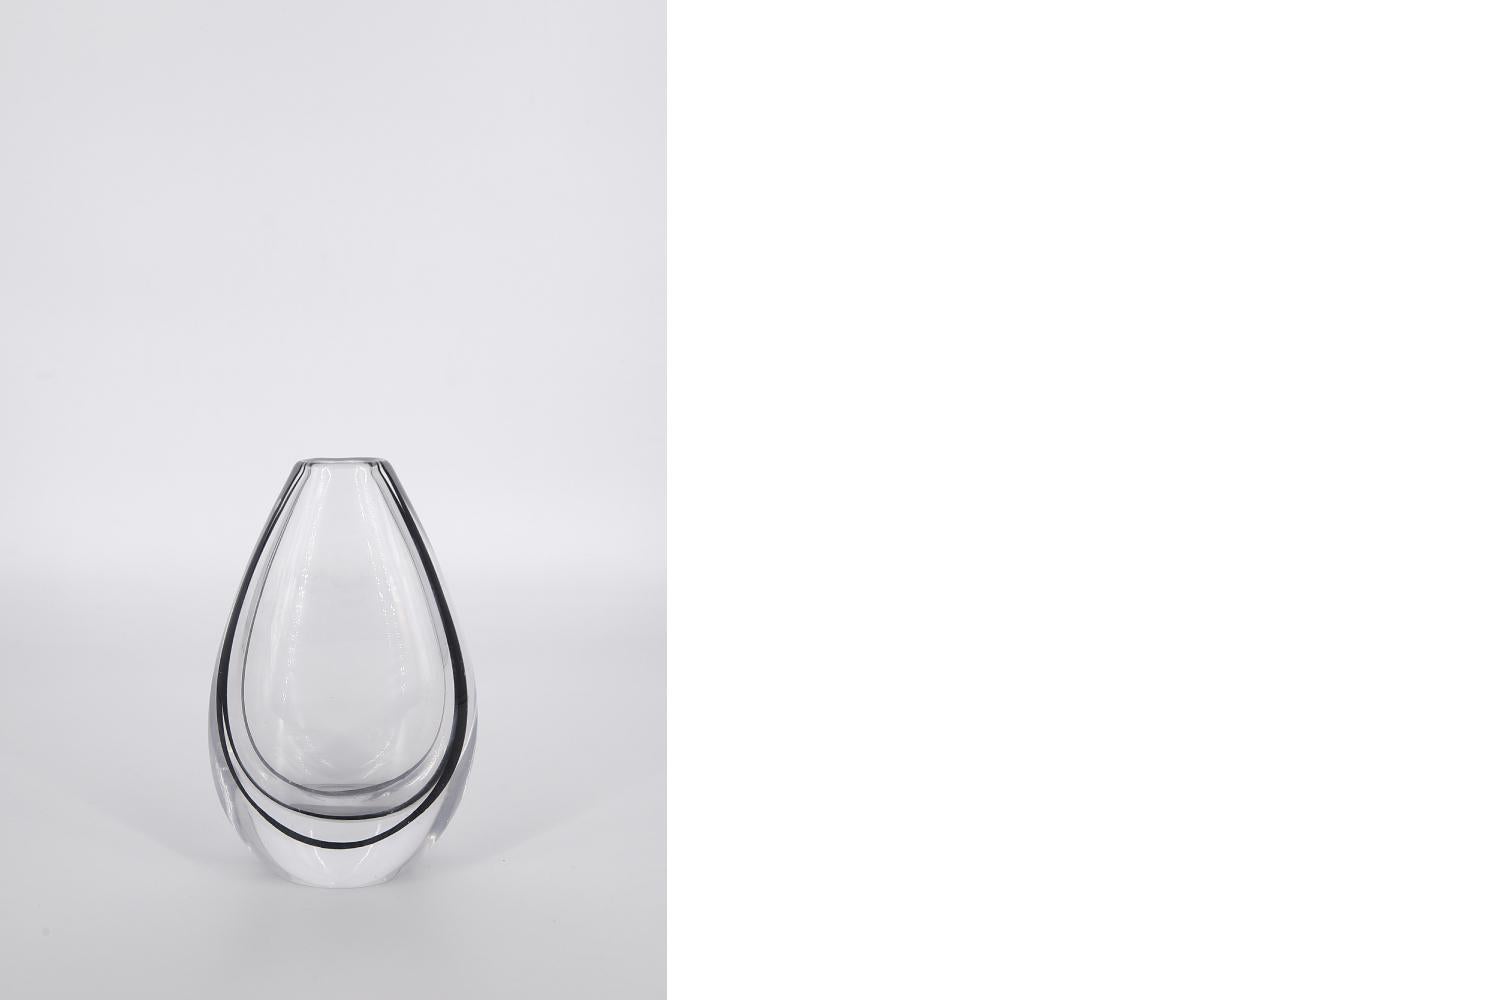 This glass vase from the Contour series was designed by Vicke Lindstrand for the Swedish glassworks Kosta Glasbruk during the 1950s. It is made of high quality clear crystal glass with a dark brown line inside the vase. The catalogue number us LH